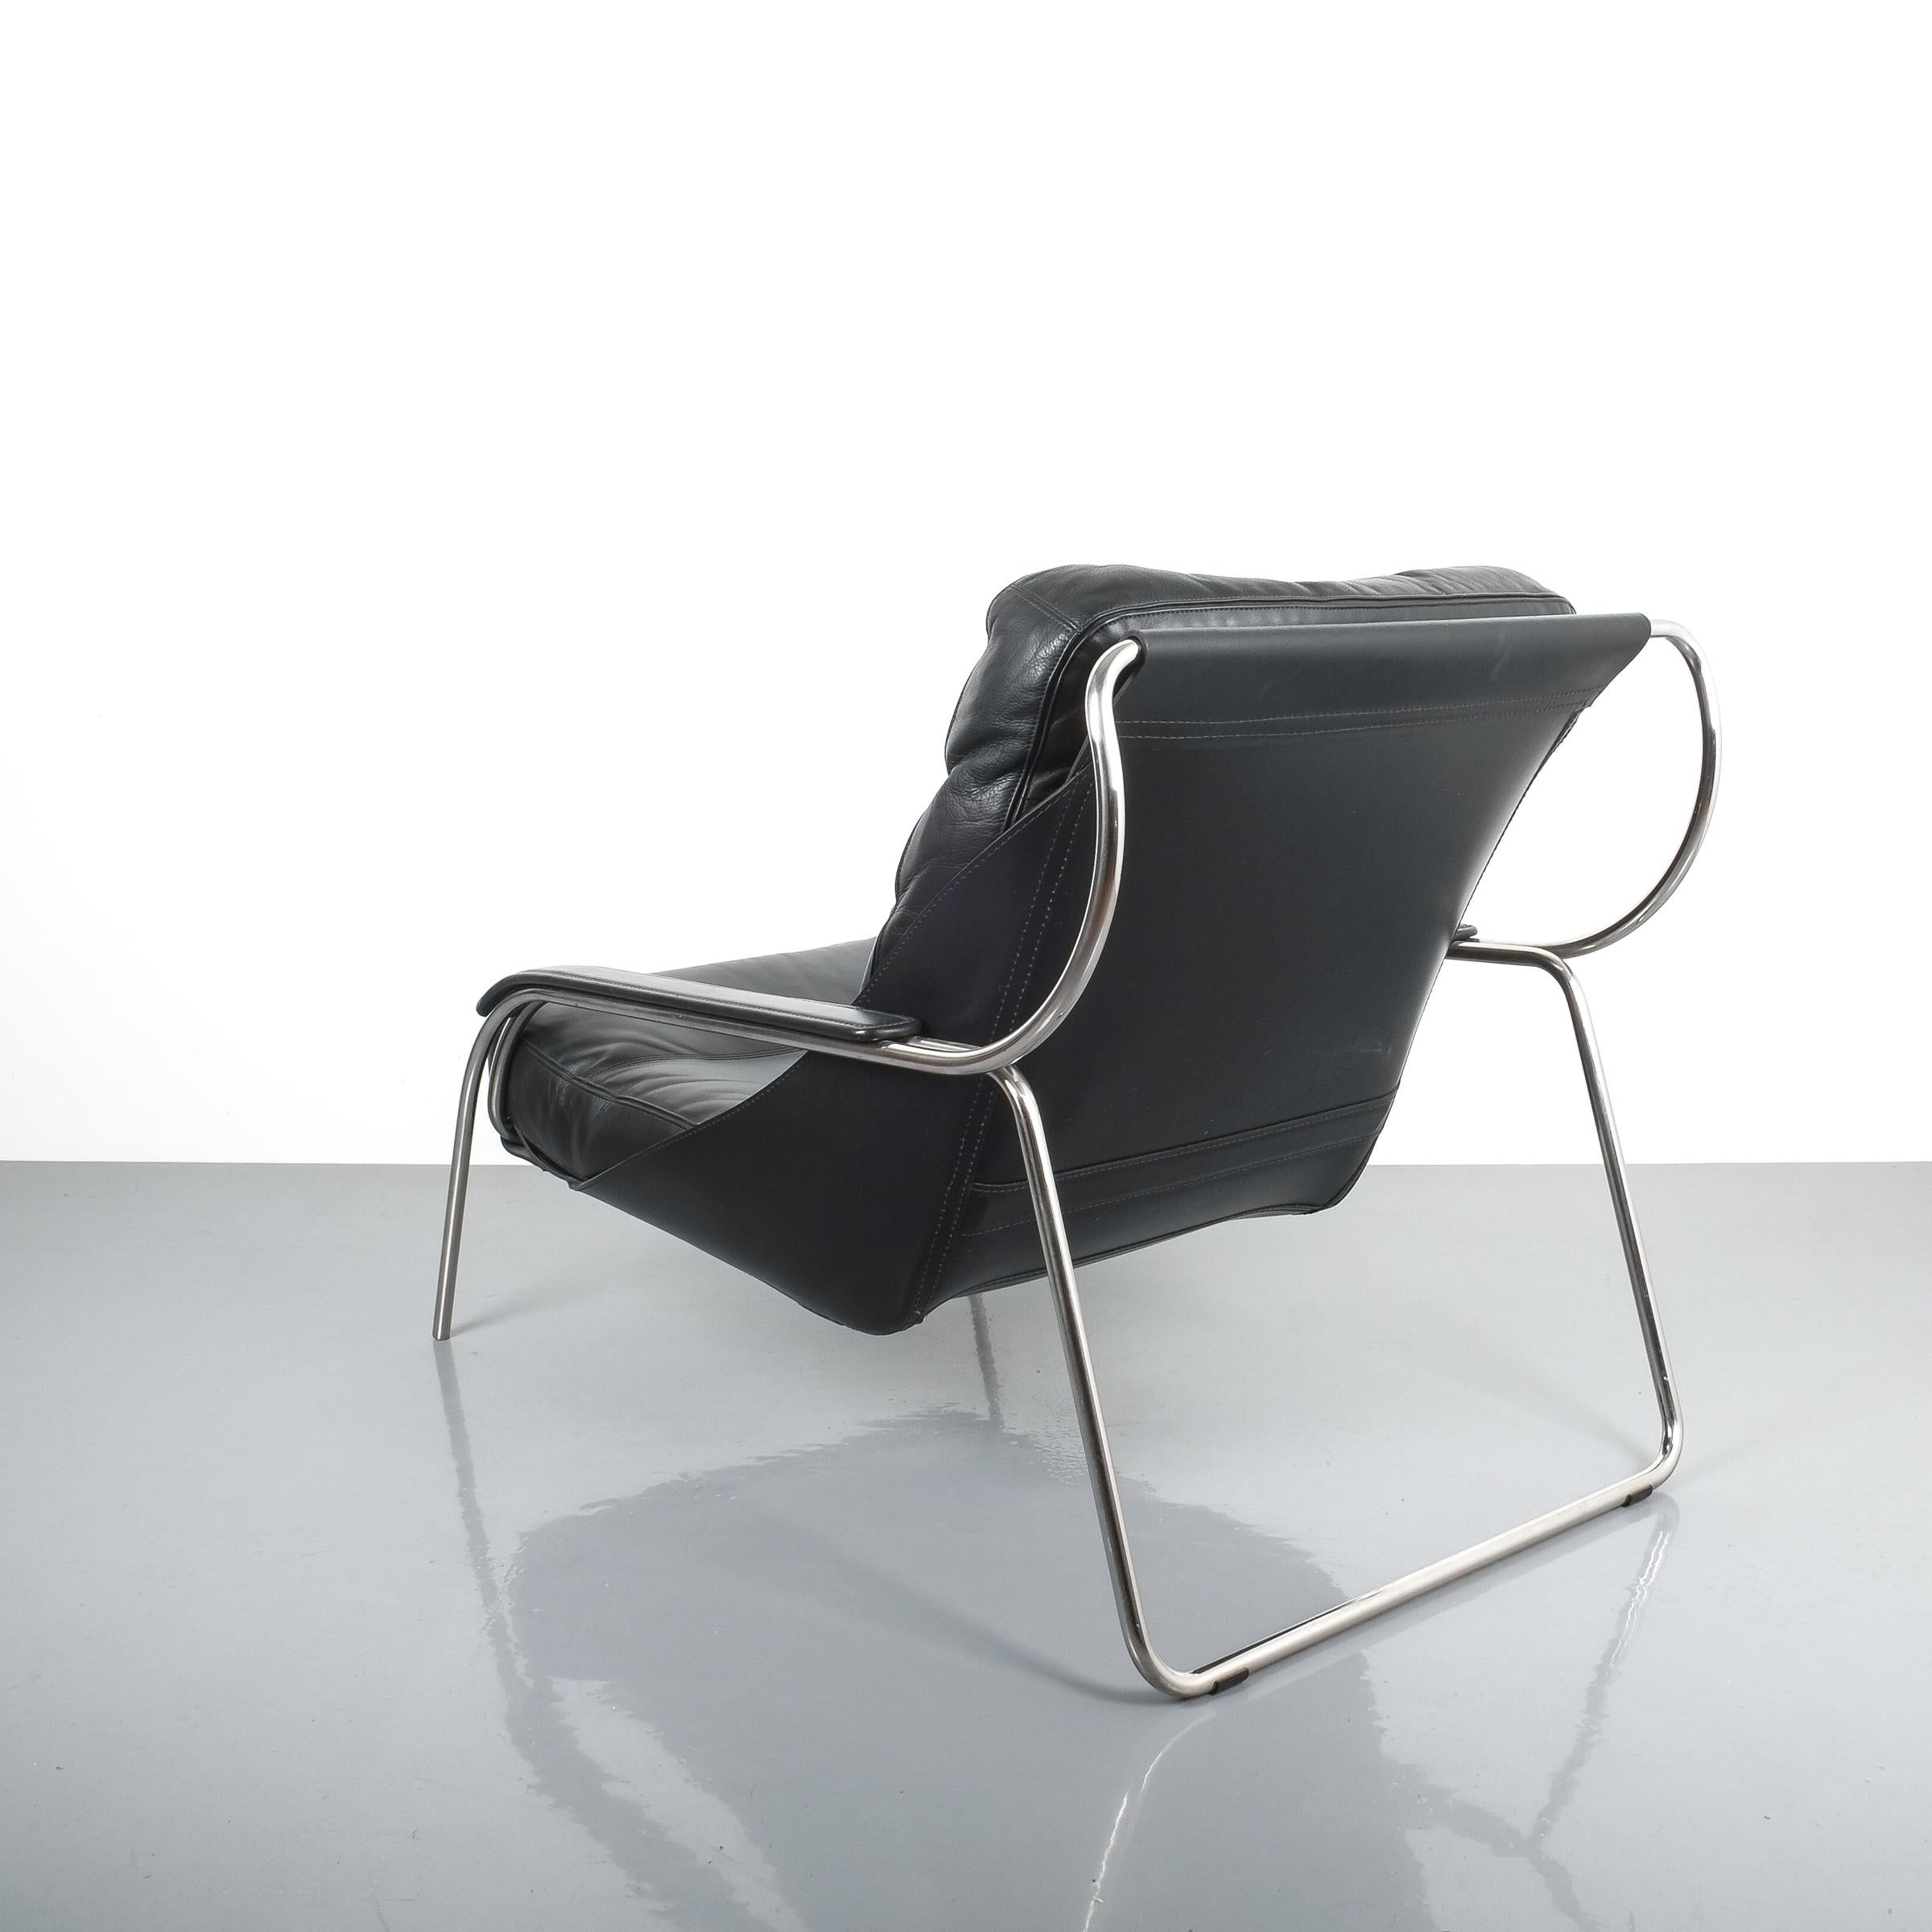 Polished Marco Zanuso Maggiolina Sling Black Leather Chair by Zanotta, 1947 For Sale